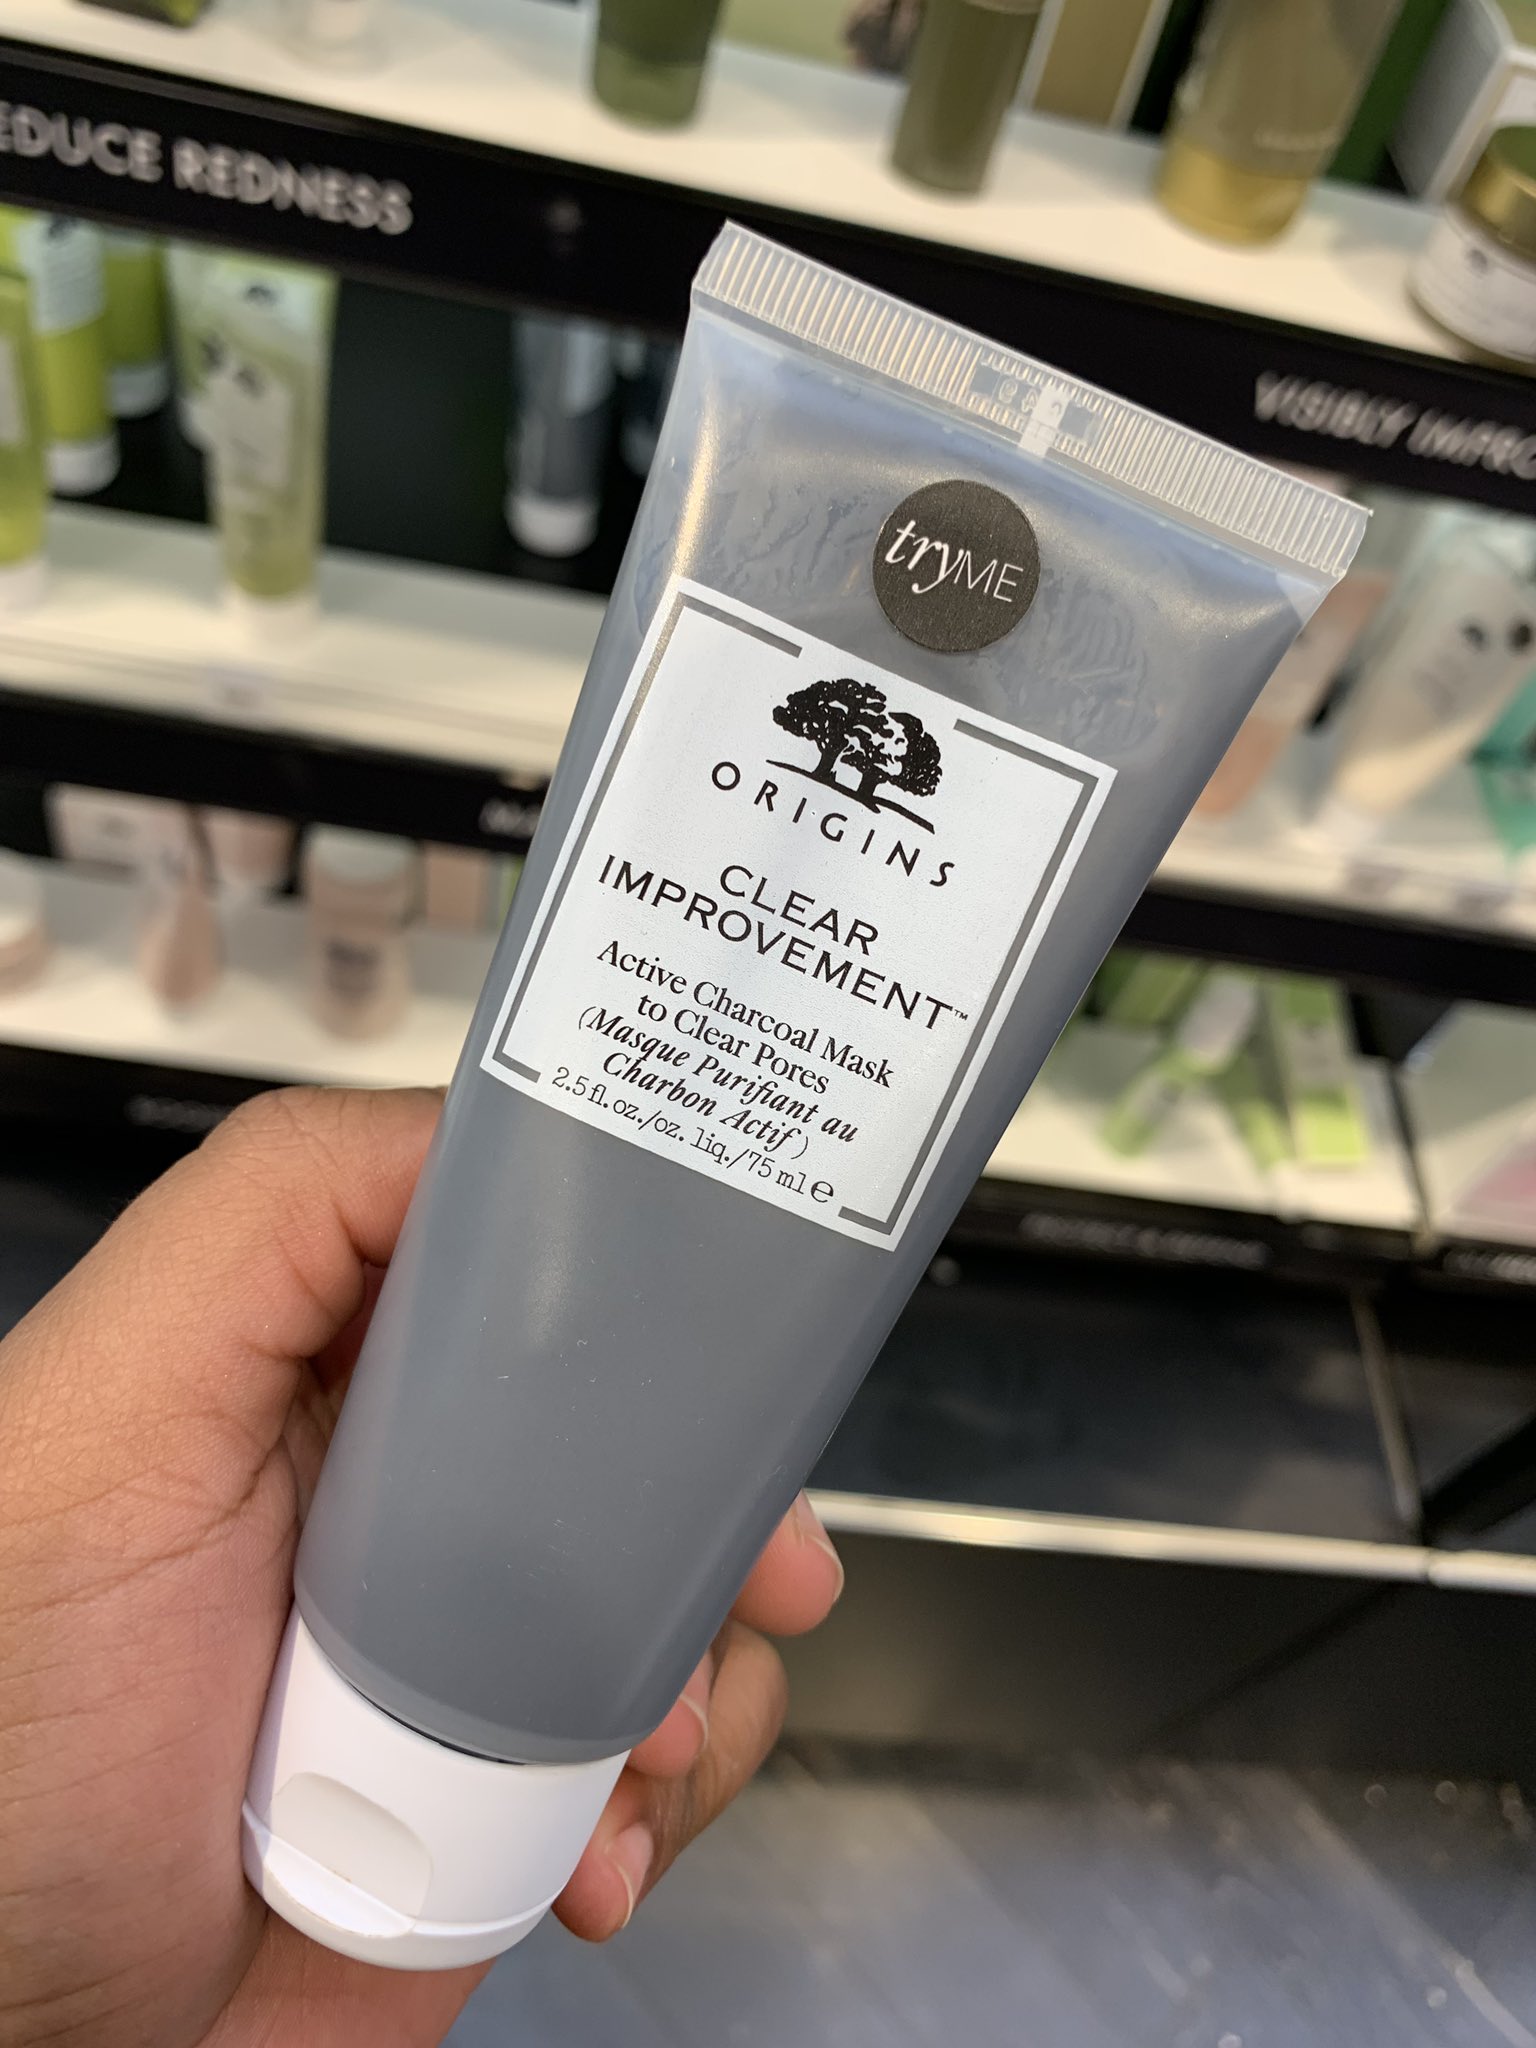 Your Skincare Fav ✨ on Twitter: "@Origins Clear Improvement Active Charcoal Mask. $26. Love this for sudden breakouts that I don't want to extract. Treats it in 1-2 days (for me,